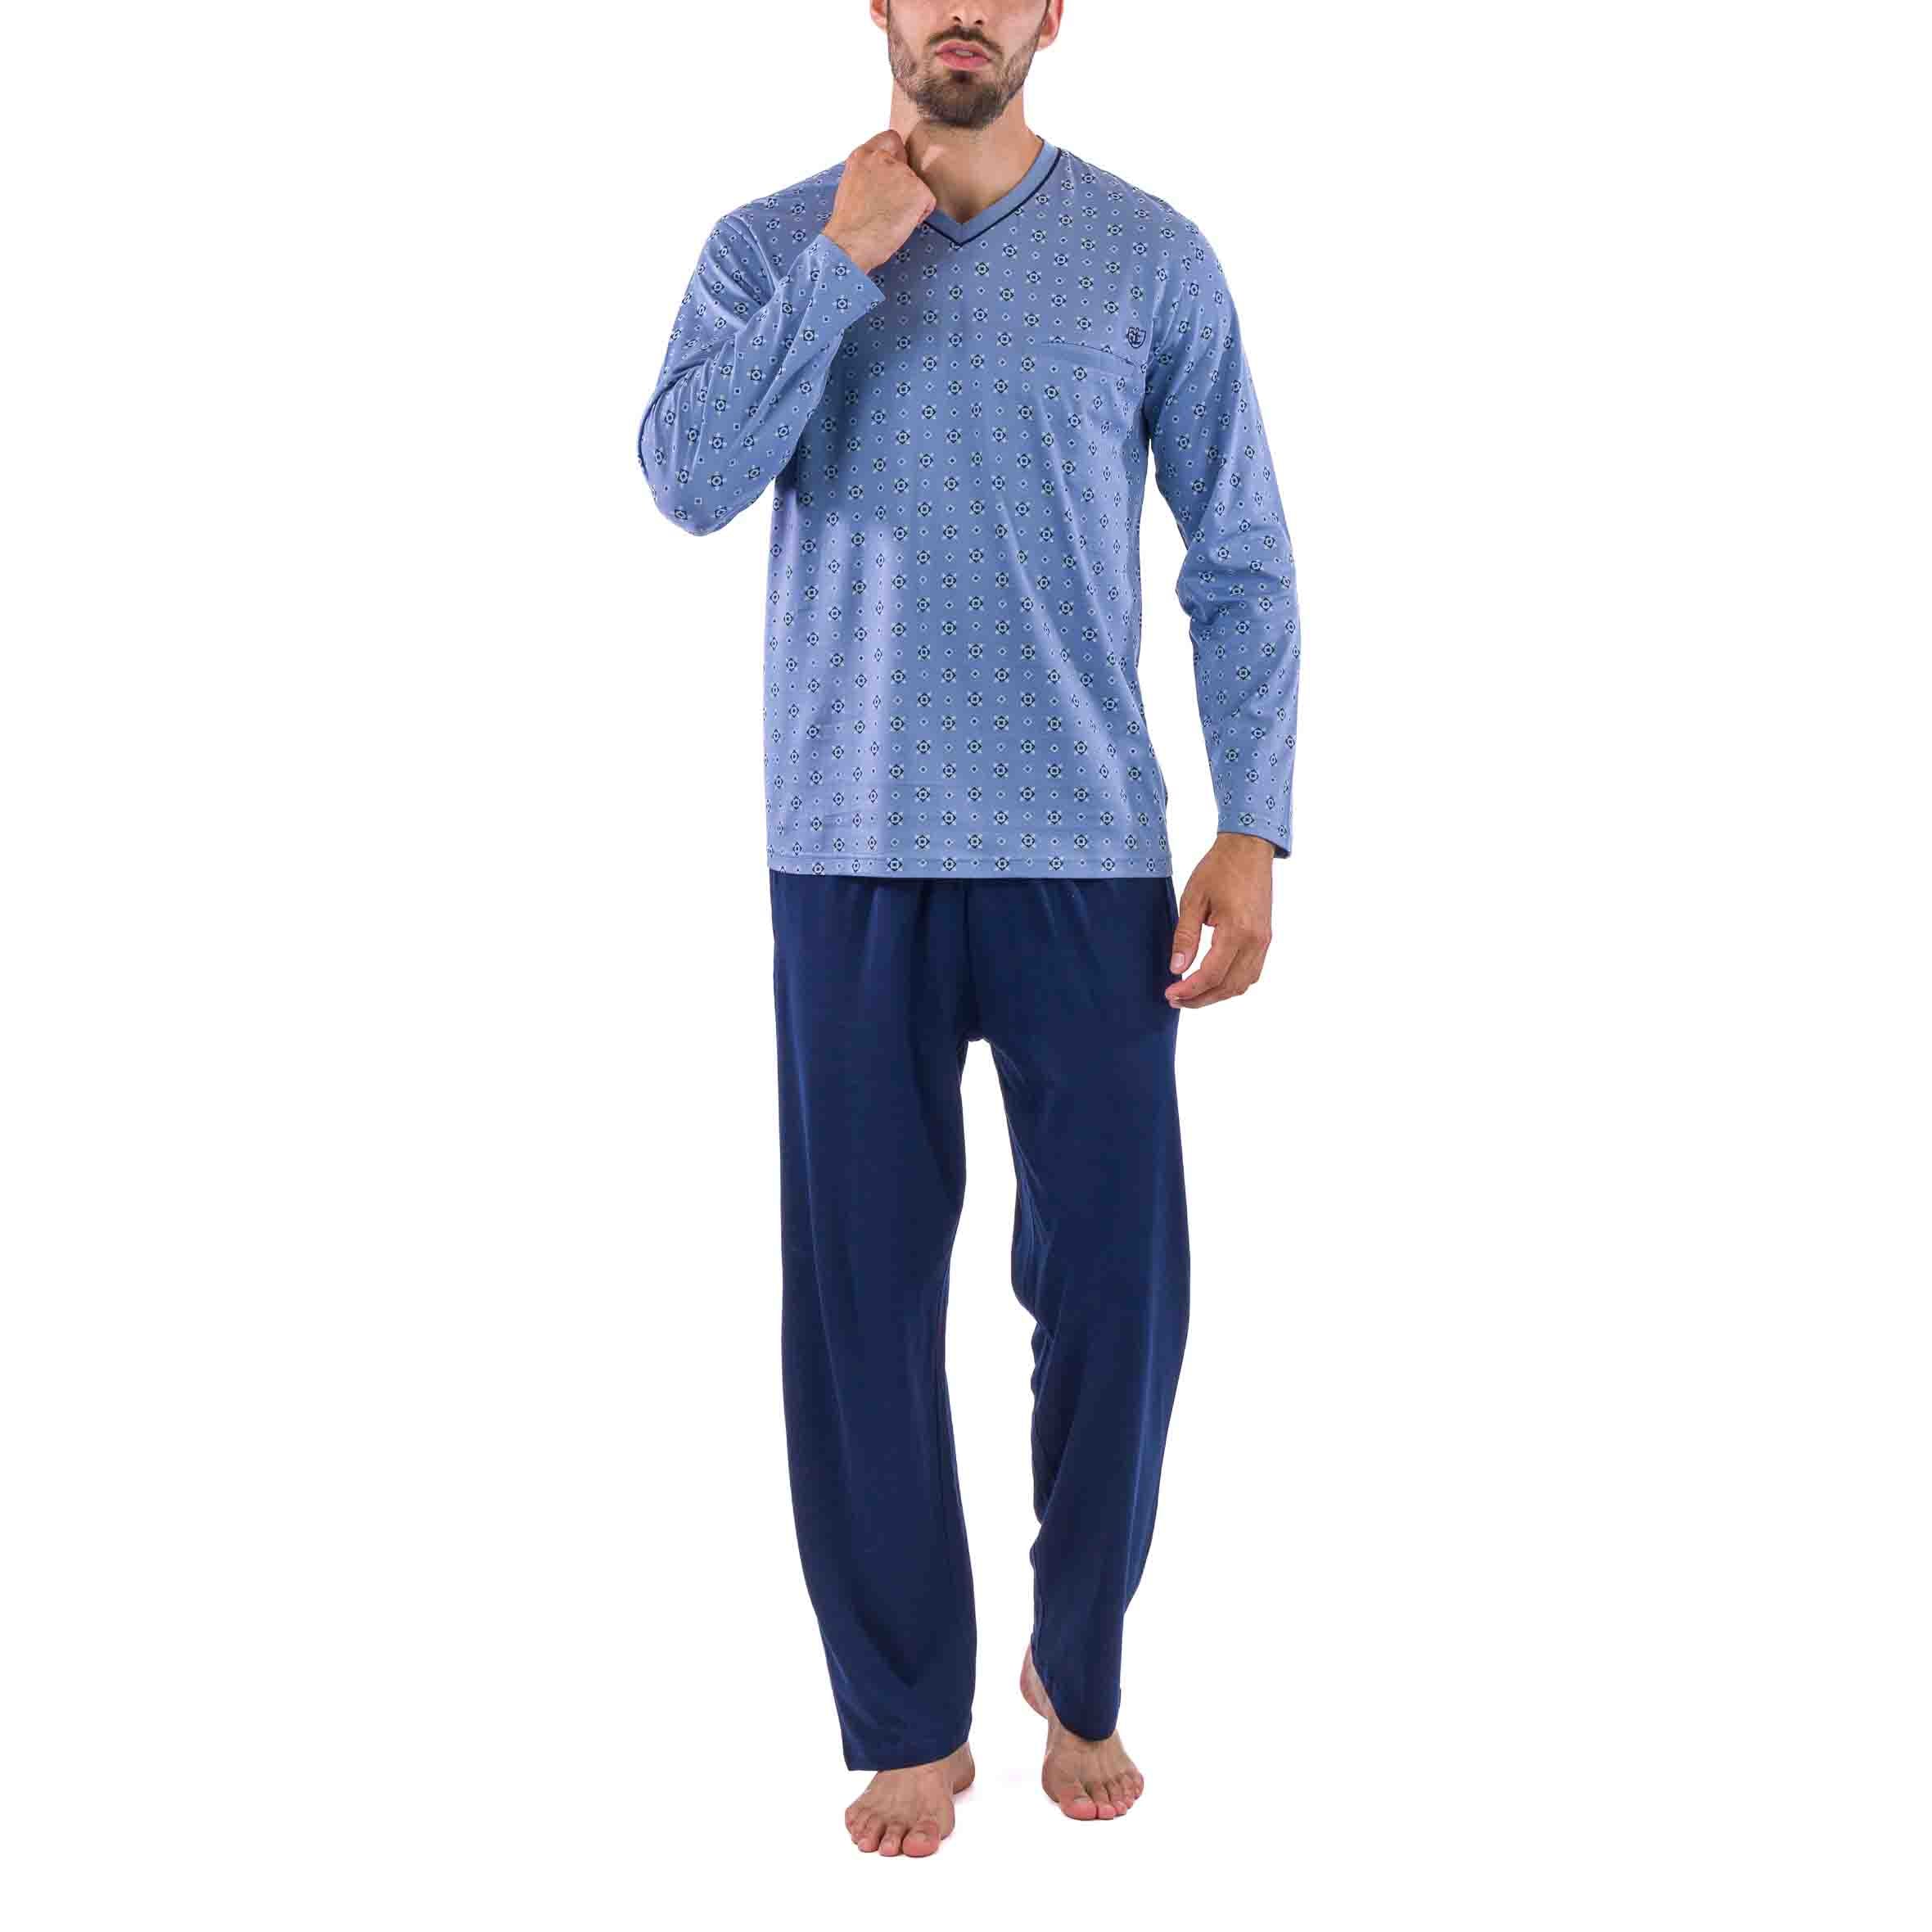 V-Neck Pajamas in Blue Printed Mercerized Cotton Jersey with Small Patterns